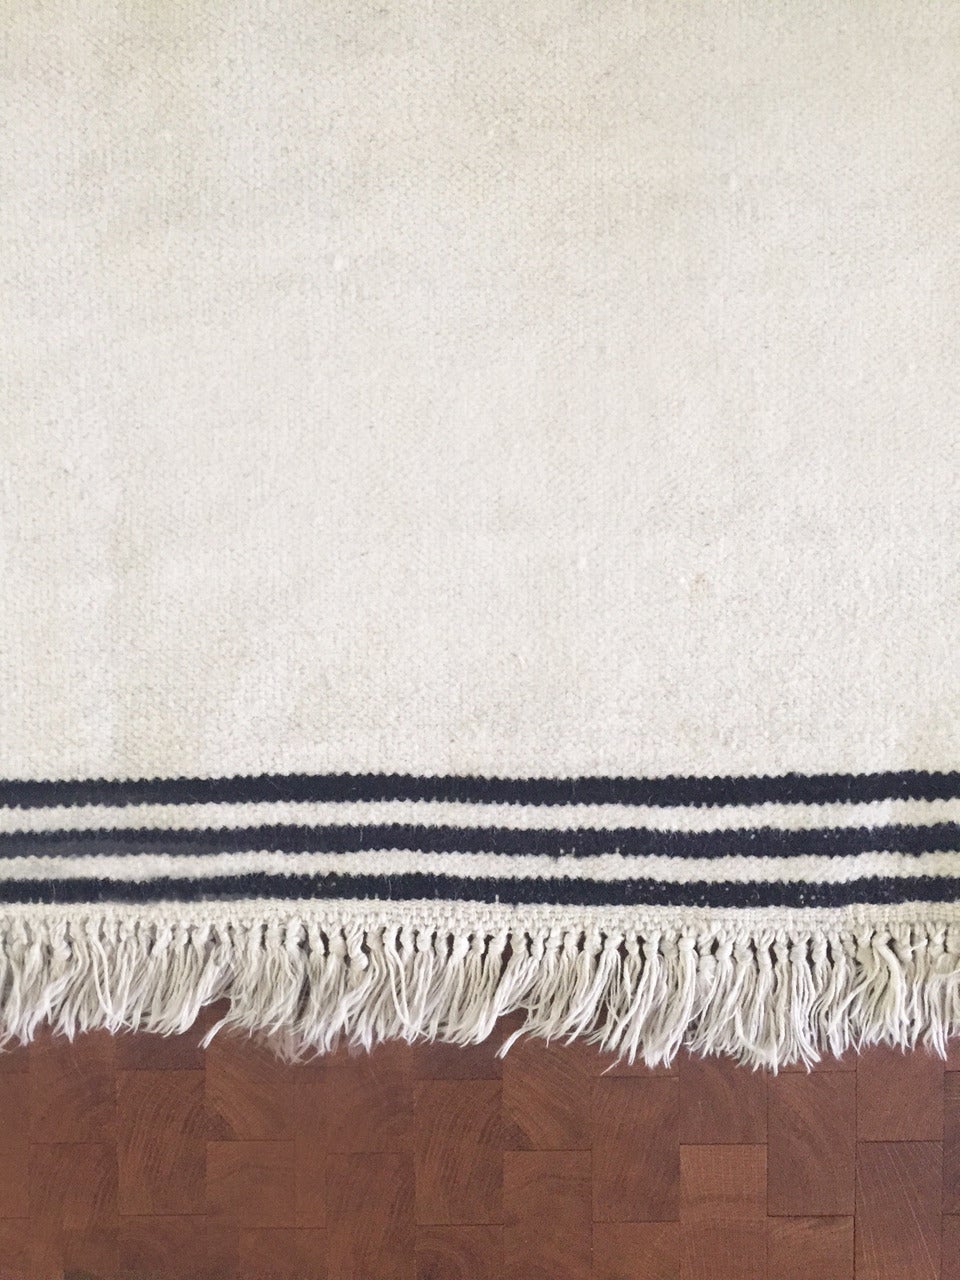 Danish Handwoven Carpet in Natural White and Black Wool by Vibeke Klint, Denmark, 1960s For Sale